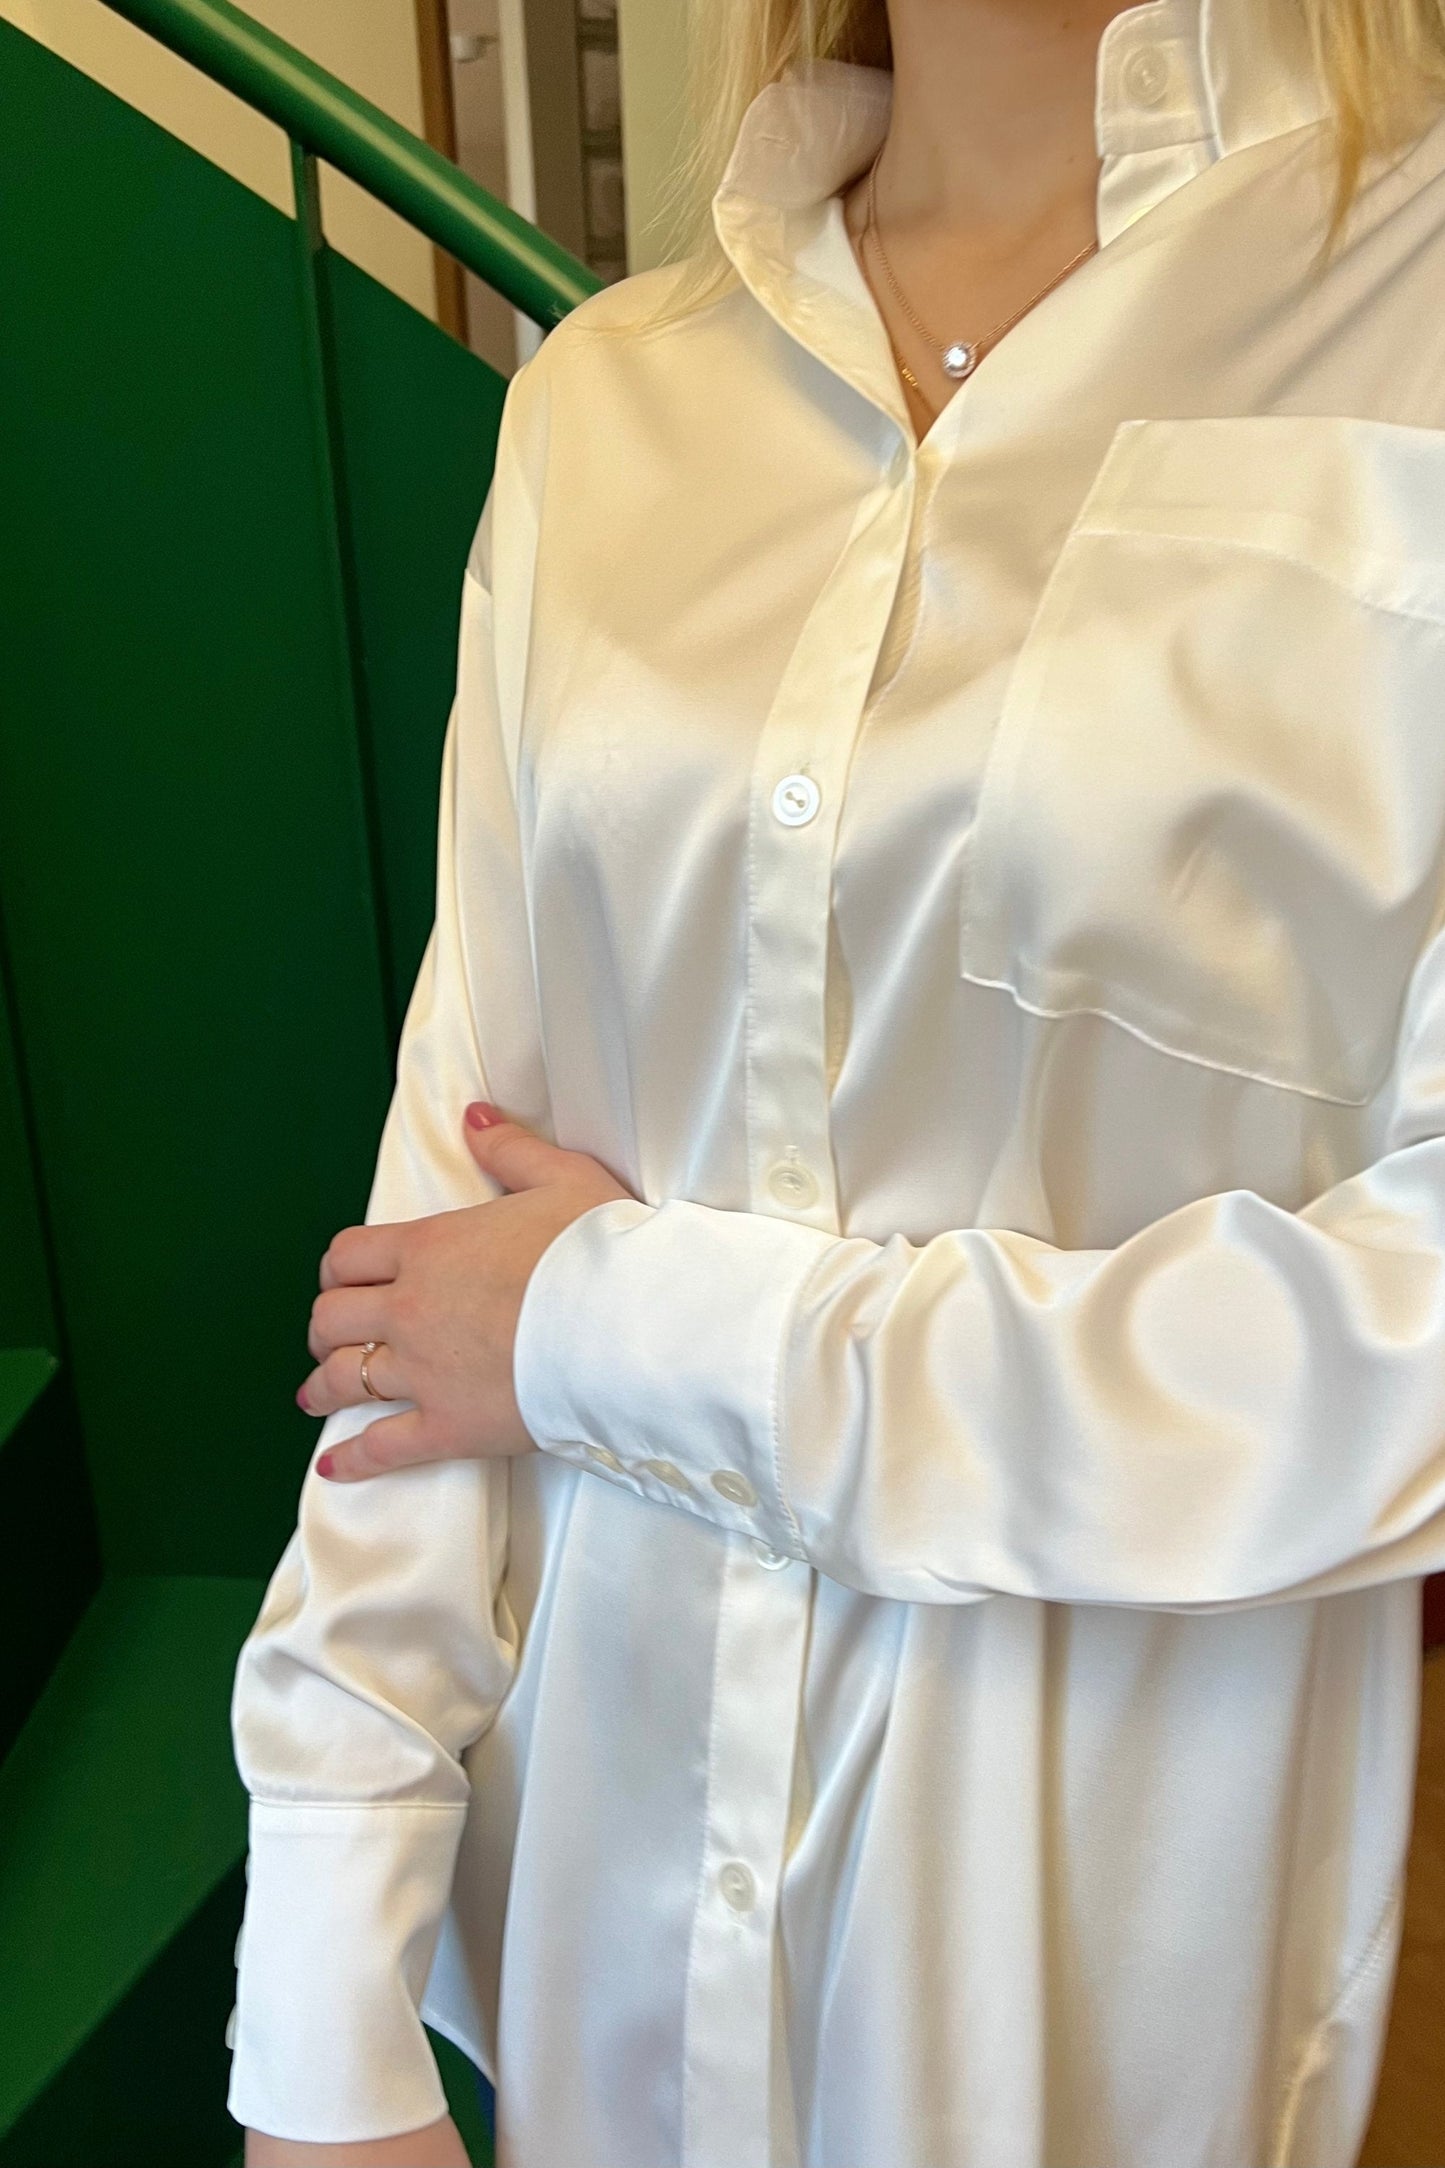 Satin blouse with long sleeves